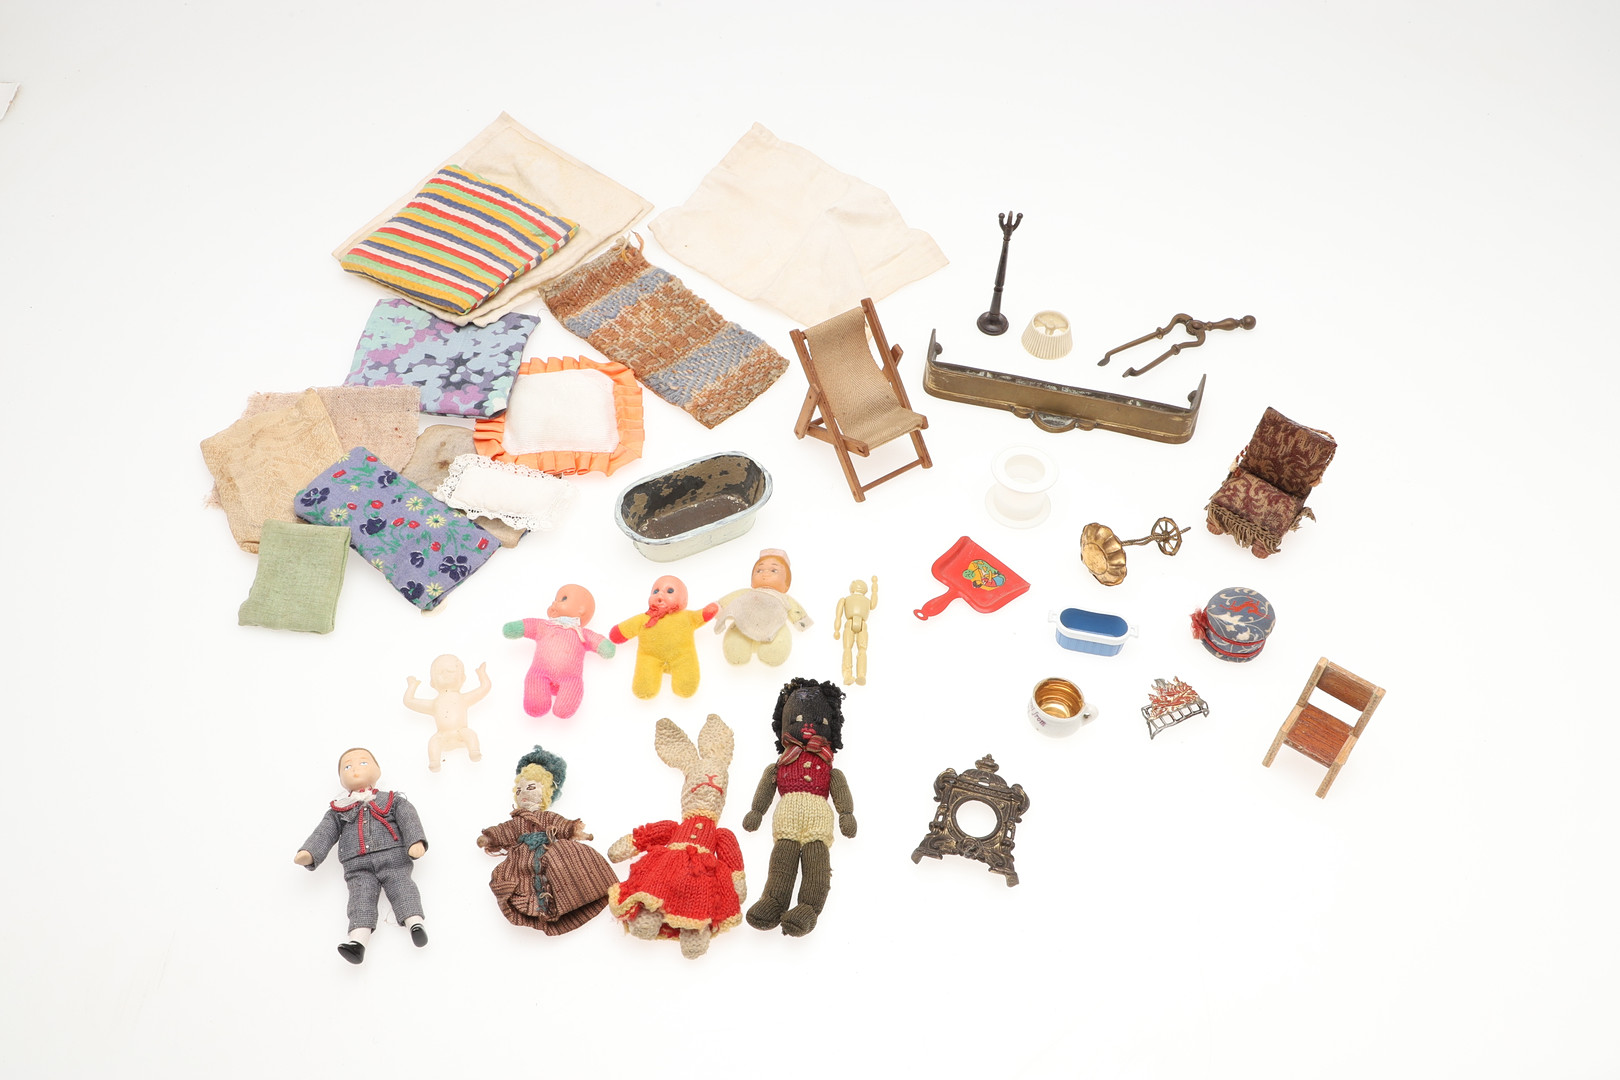 ANTIQUE DOLLS HOUSE & ACCESSORIES - MODELLED AFTER BROUGHTON HALL, STAFFORDSHIRE. - Image 20 of 33